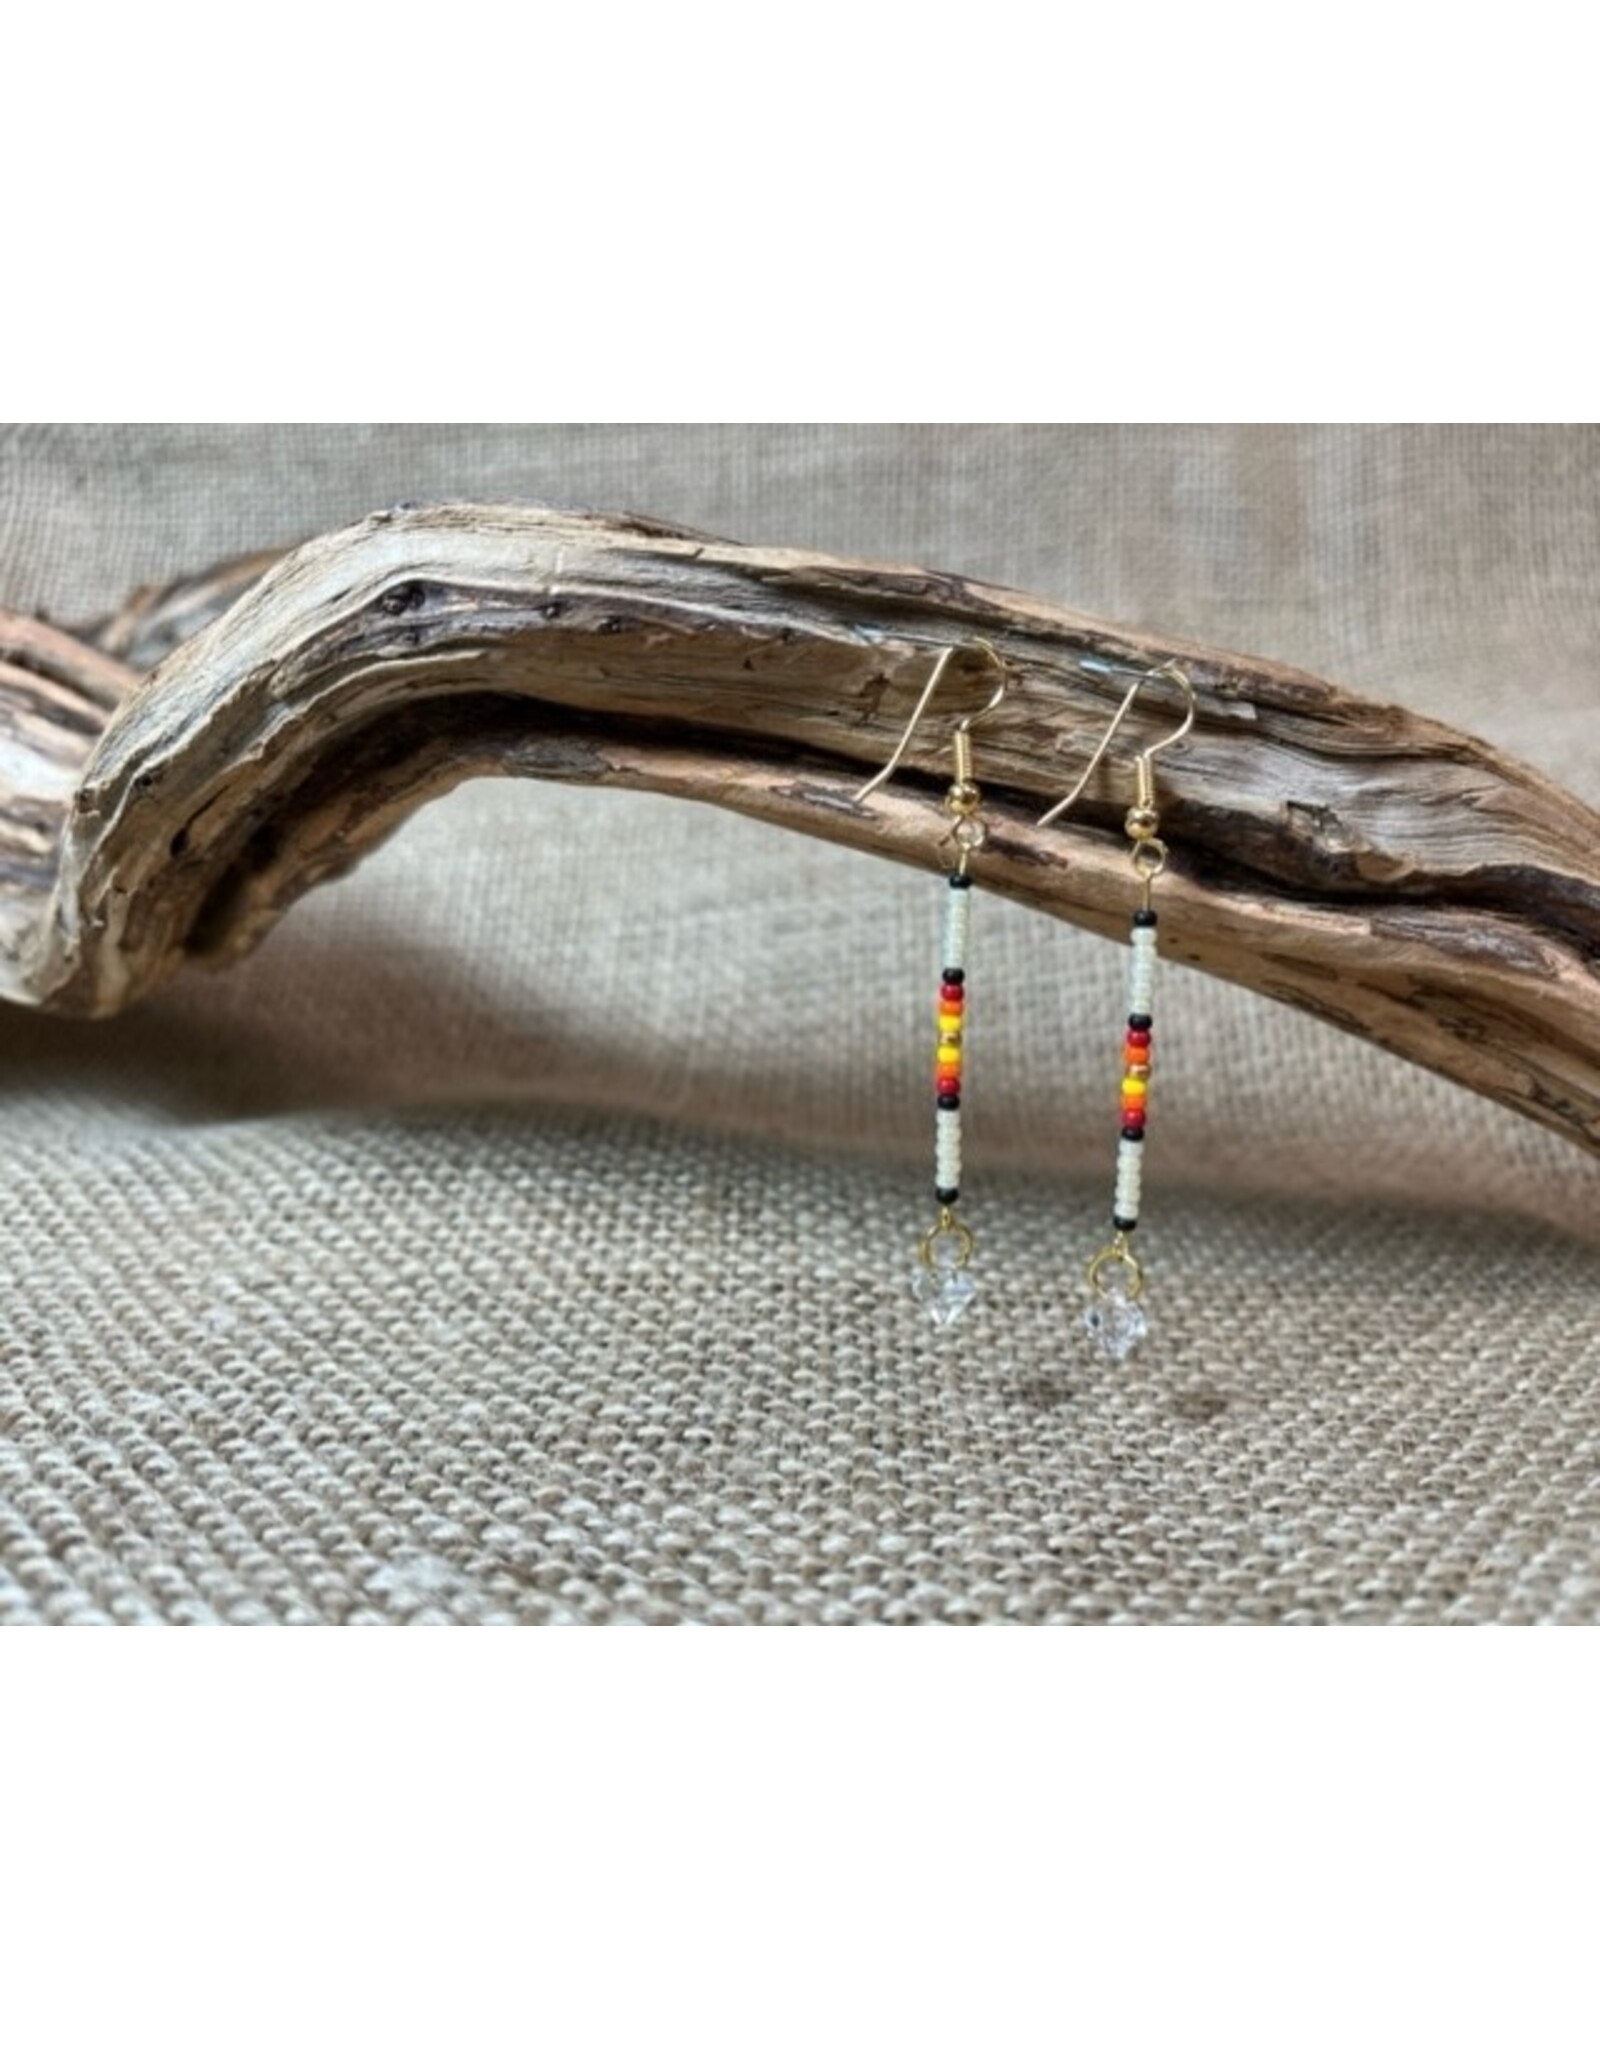 Mothers of All Crafts - Beaded Earrings, Canada